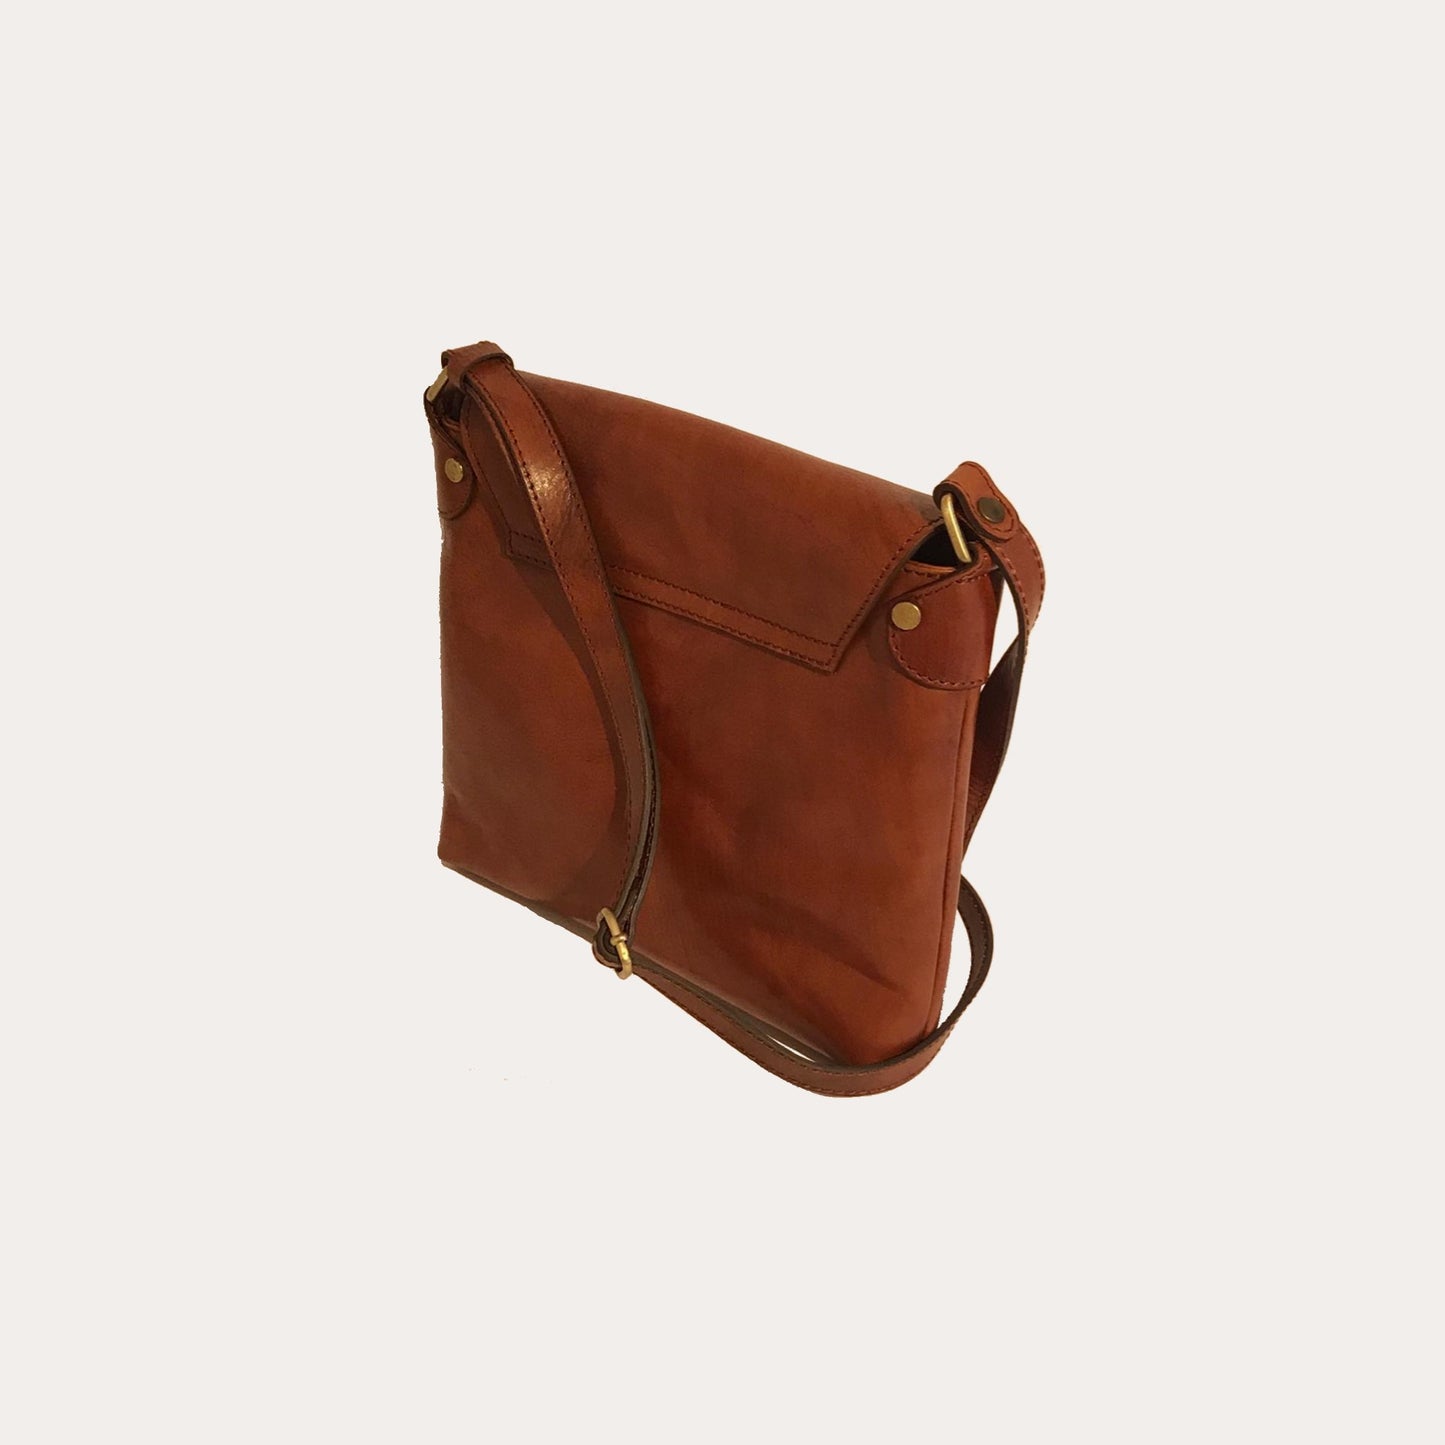 Tan Leather Bag with Flap